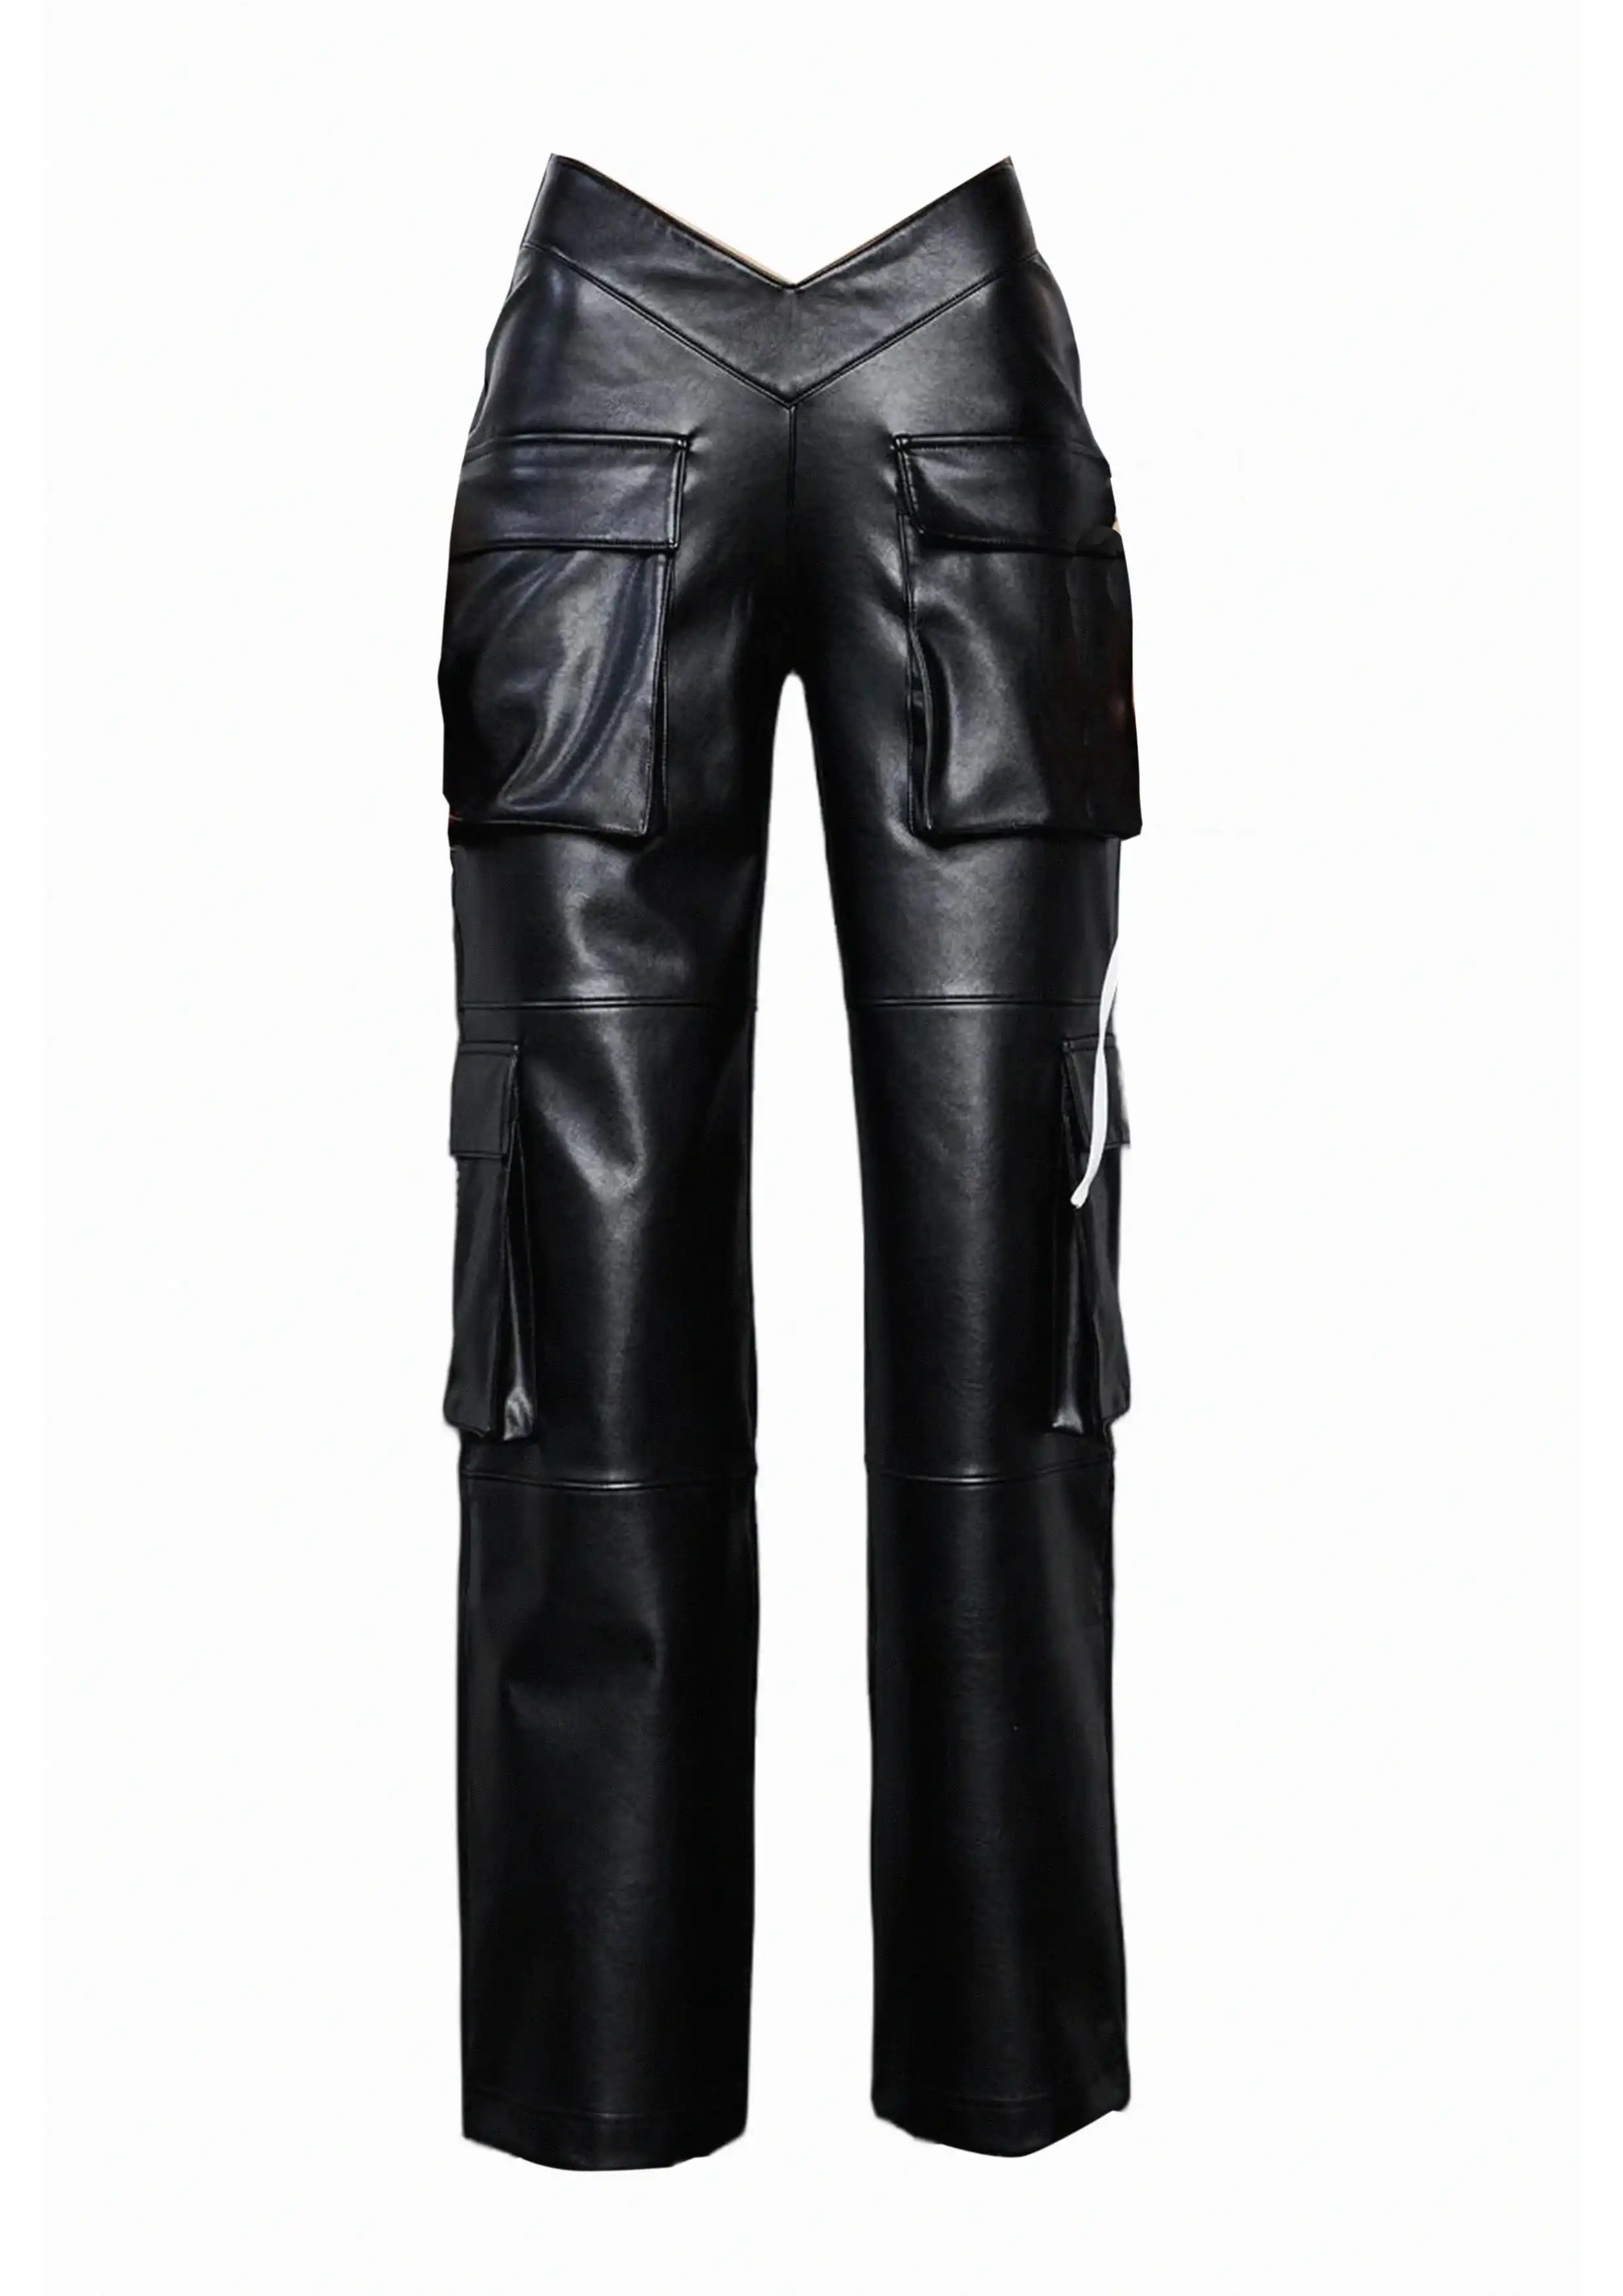 Are faux leather pants suitable for hot weather?